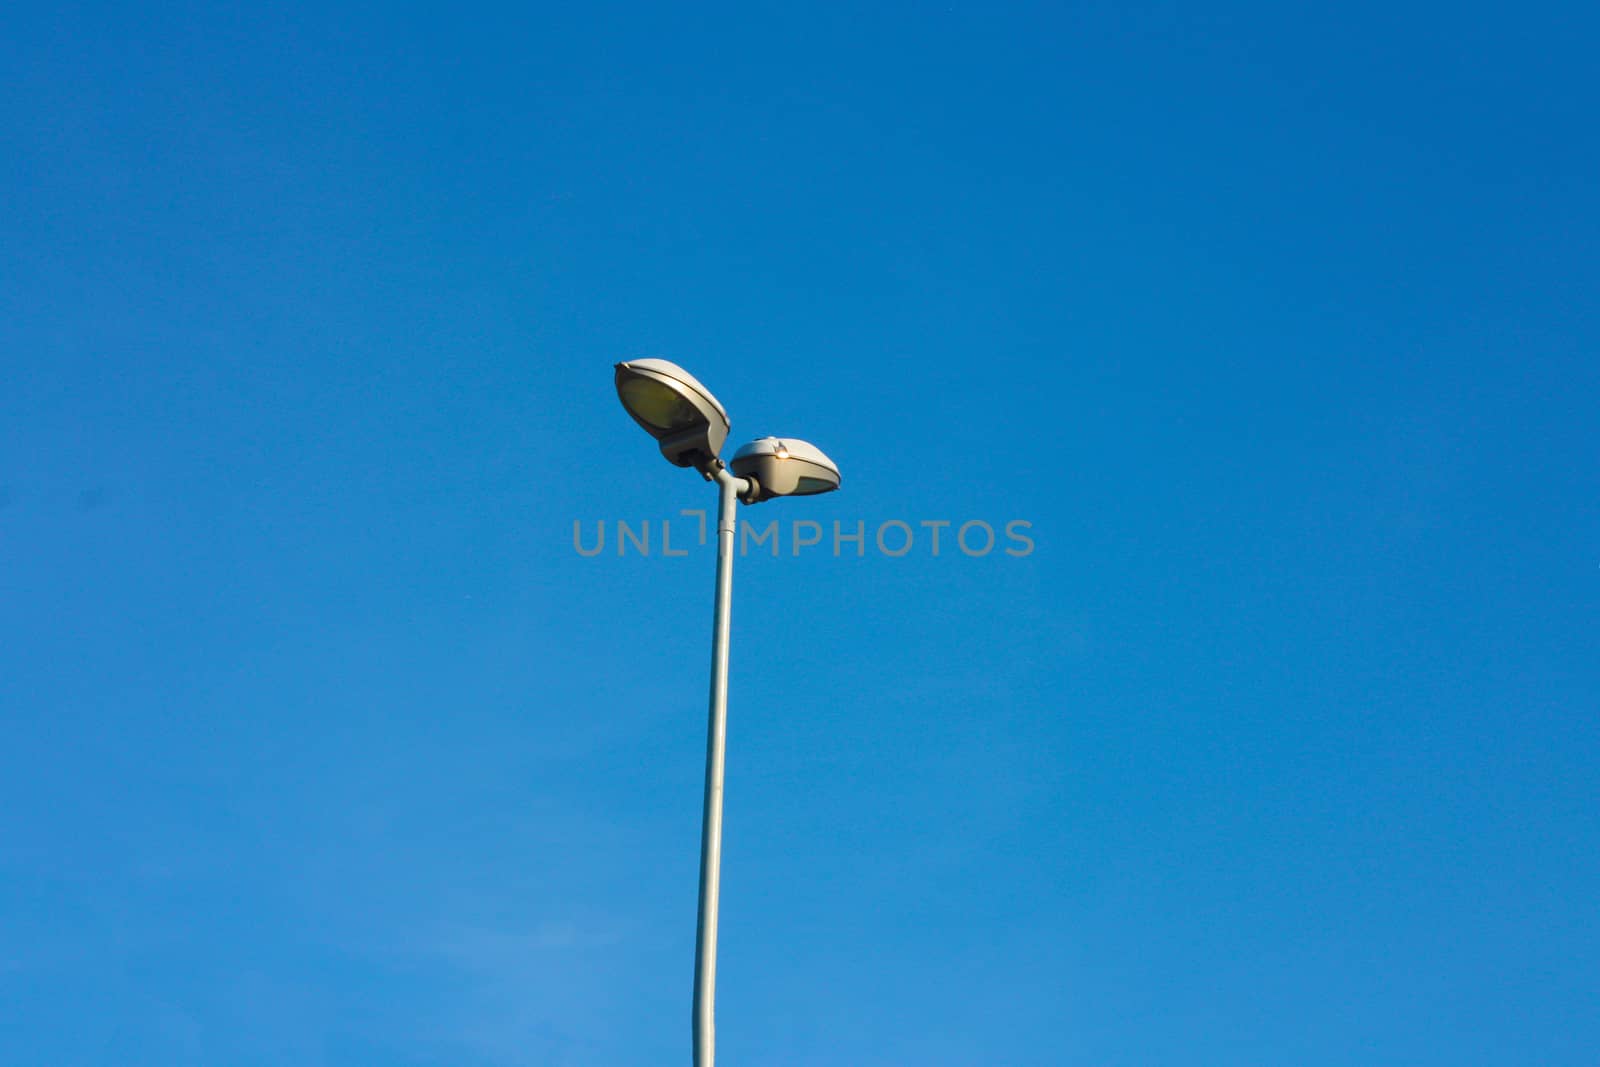 slim and lonely lamppost in contrast against the clear blue sky without clouds